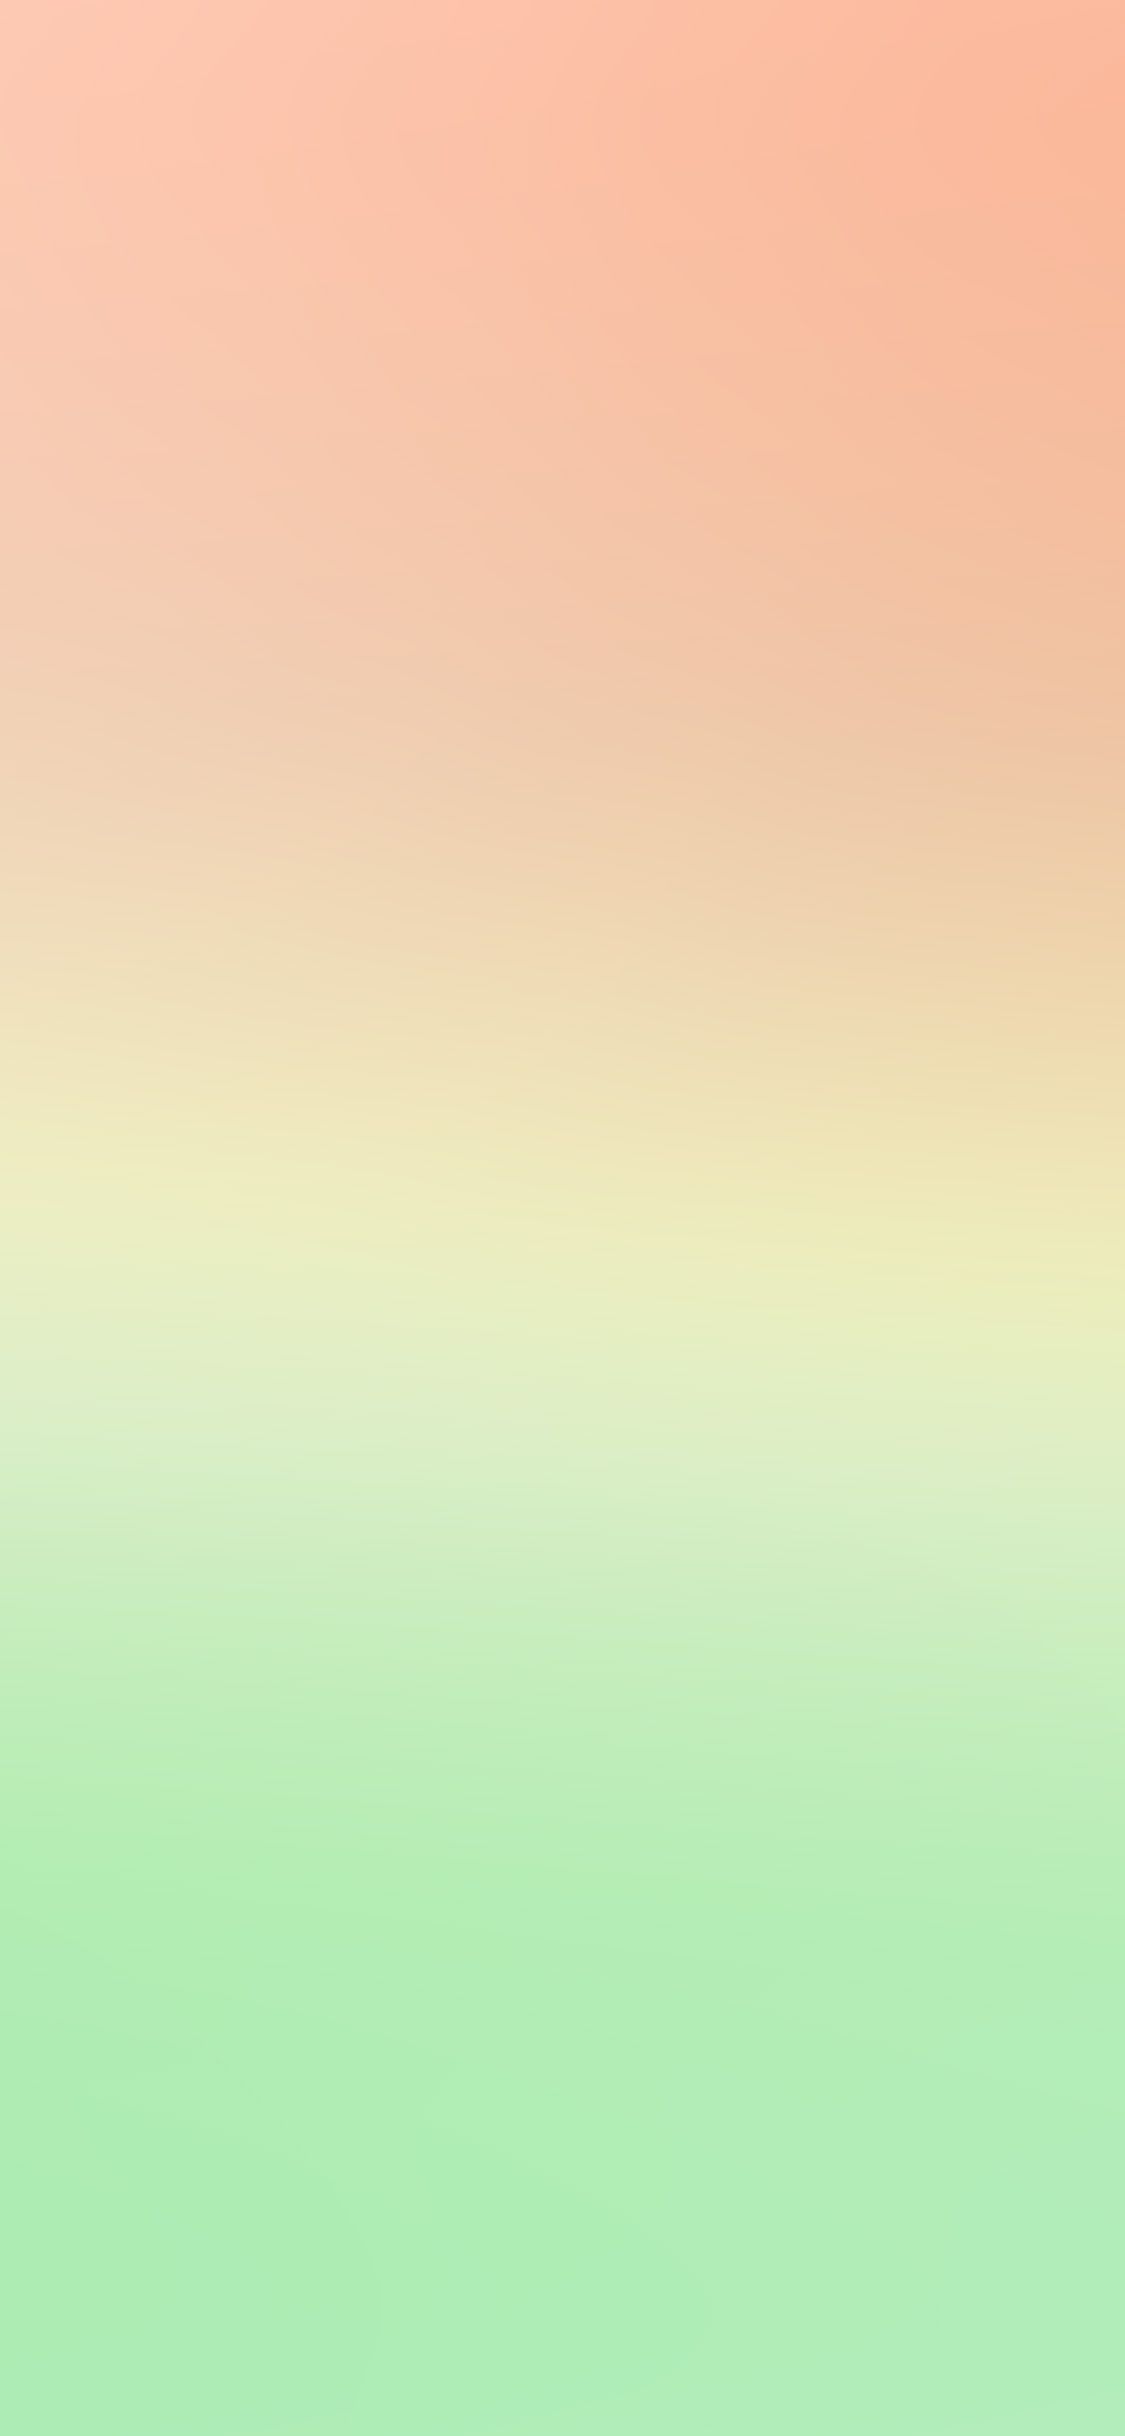 A green and orange background with white text - Pastel green